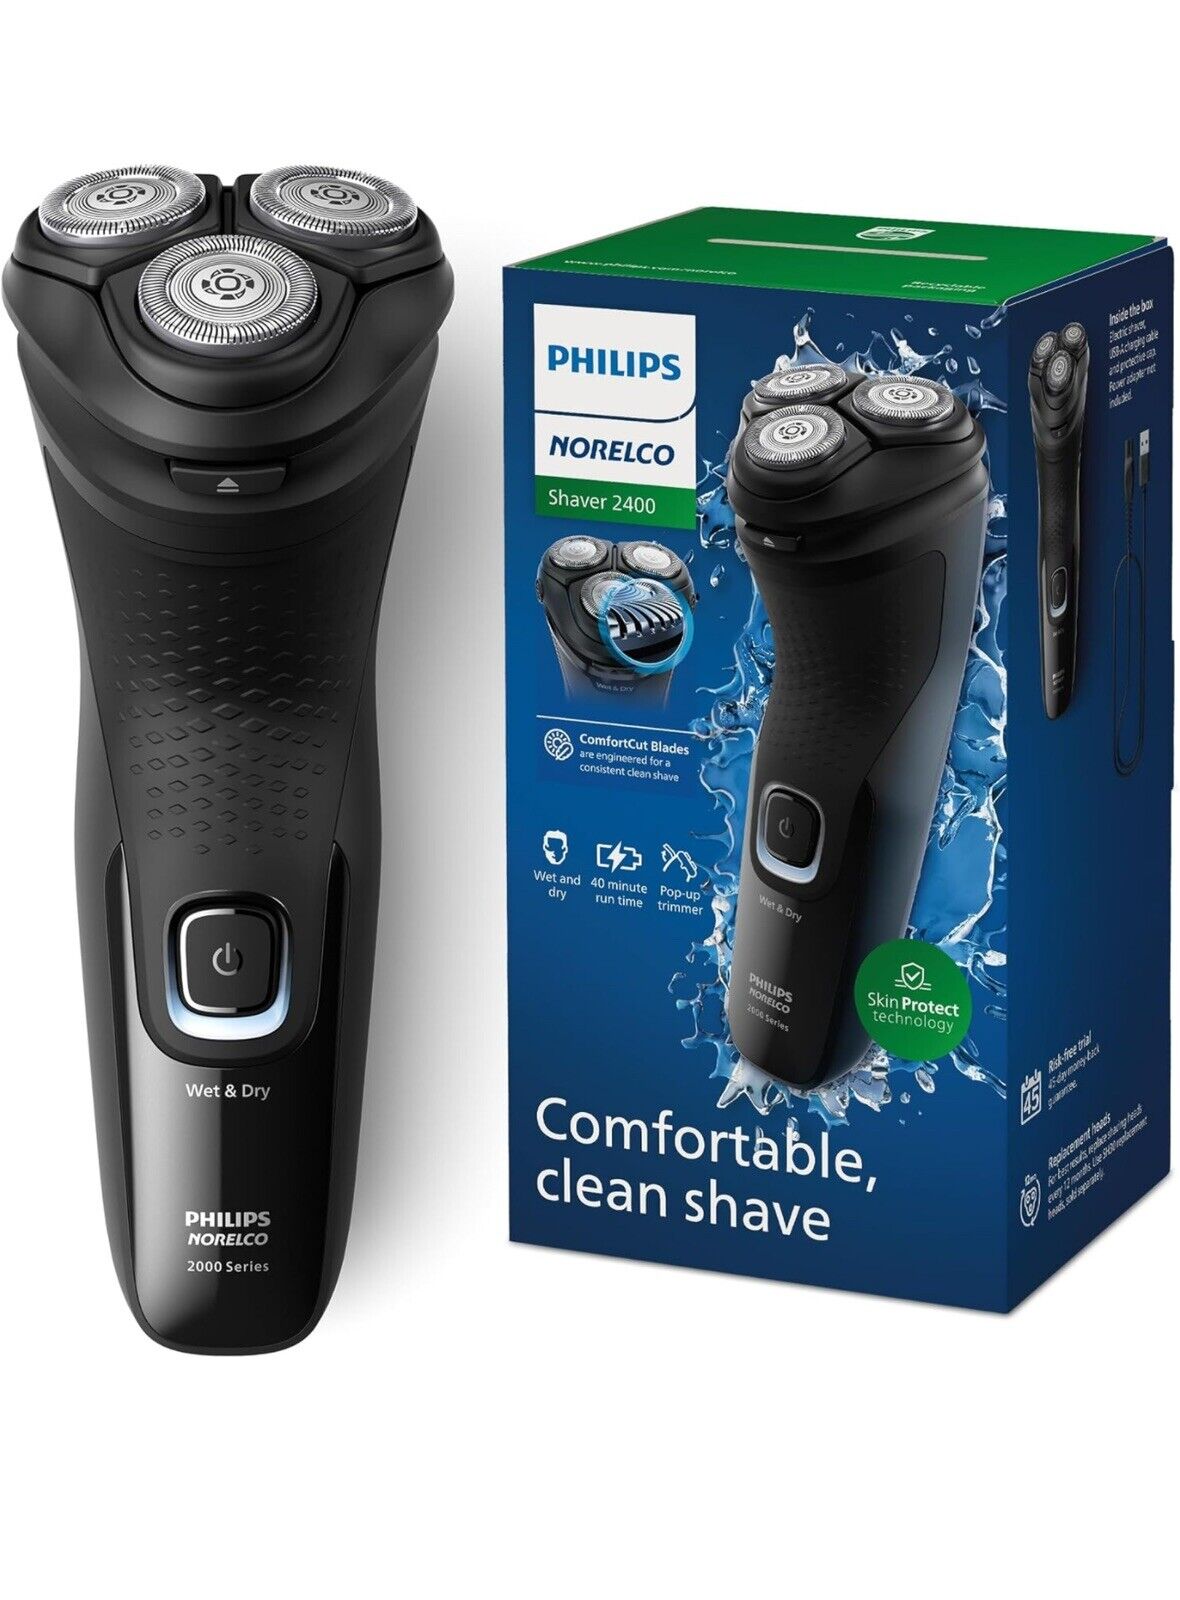 Norelco Shaver 2400, Rechargeable Cordless Electric Shaver with Pop-Up Trimmer